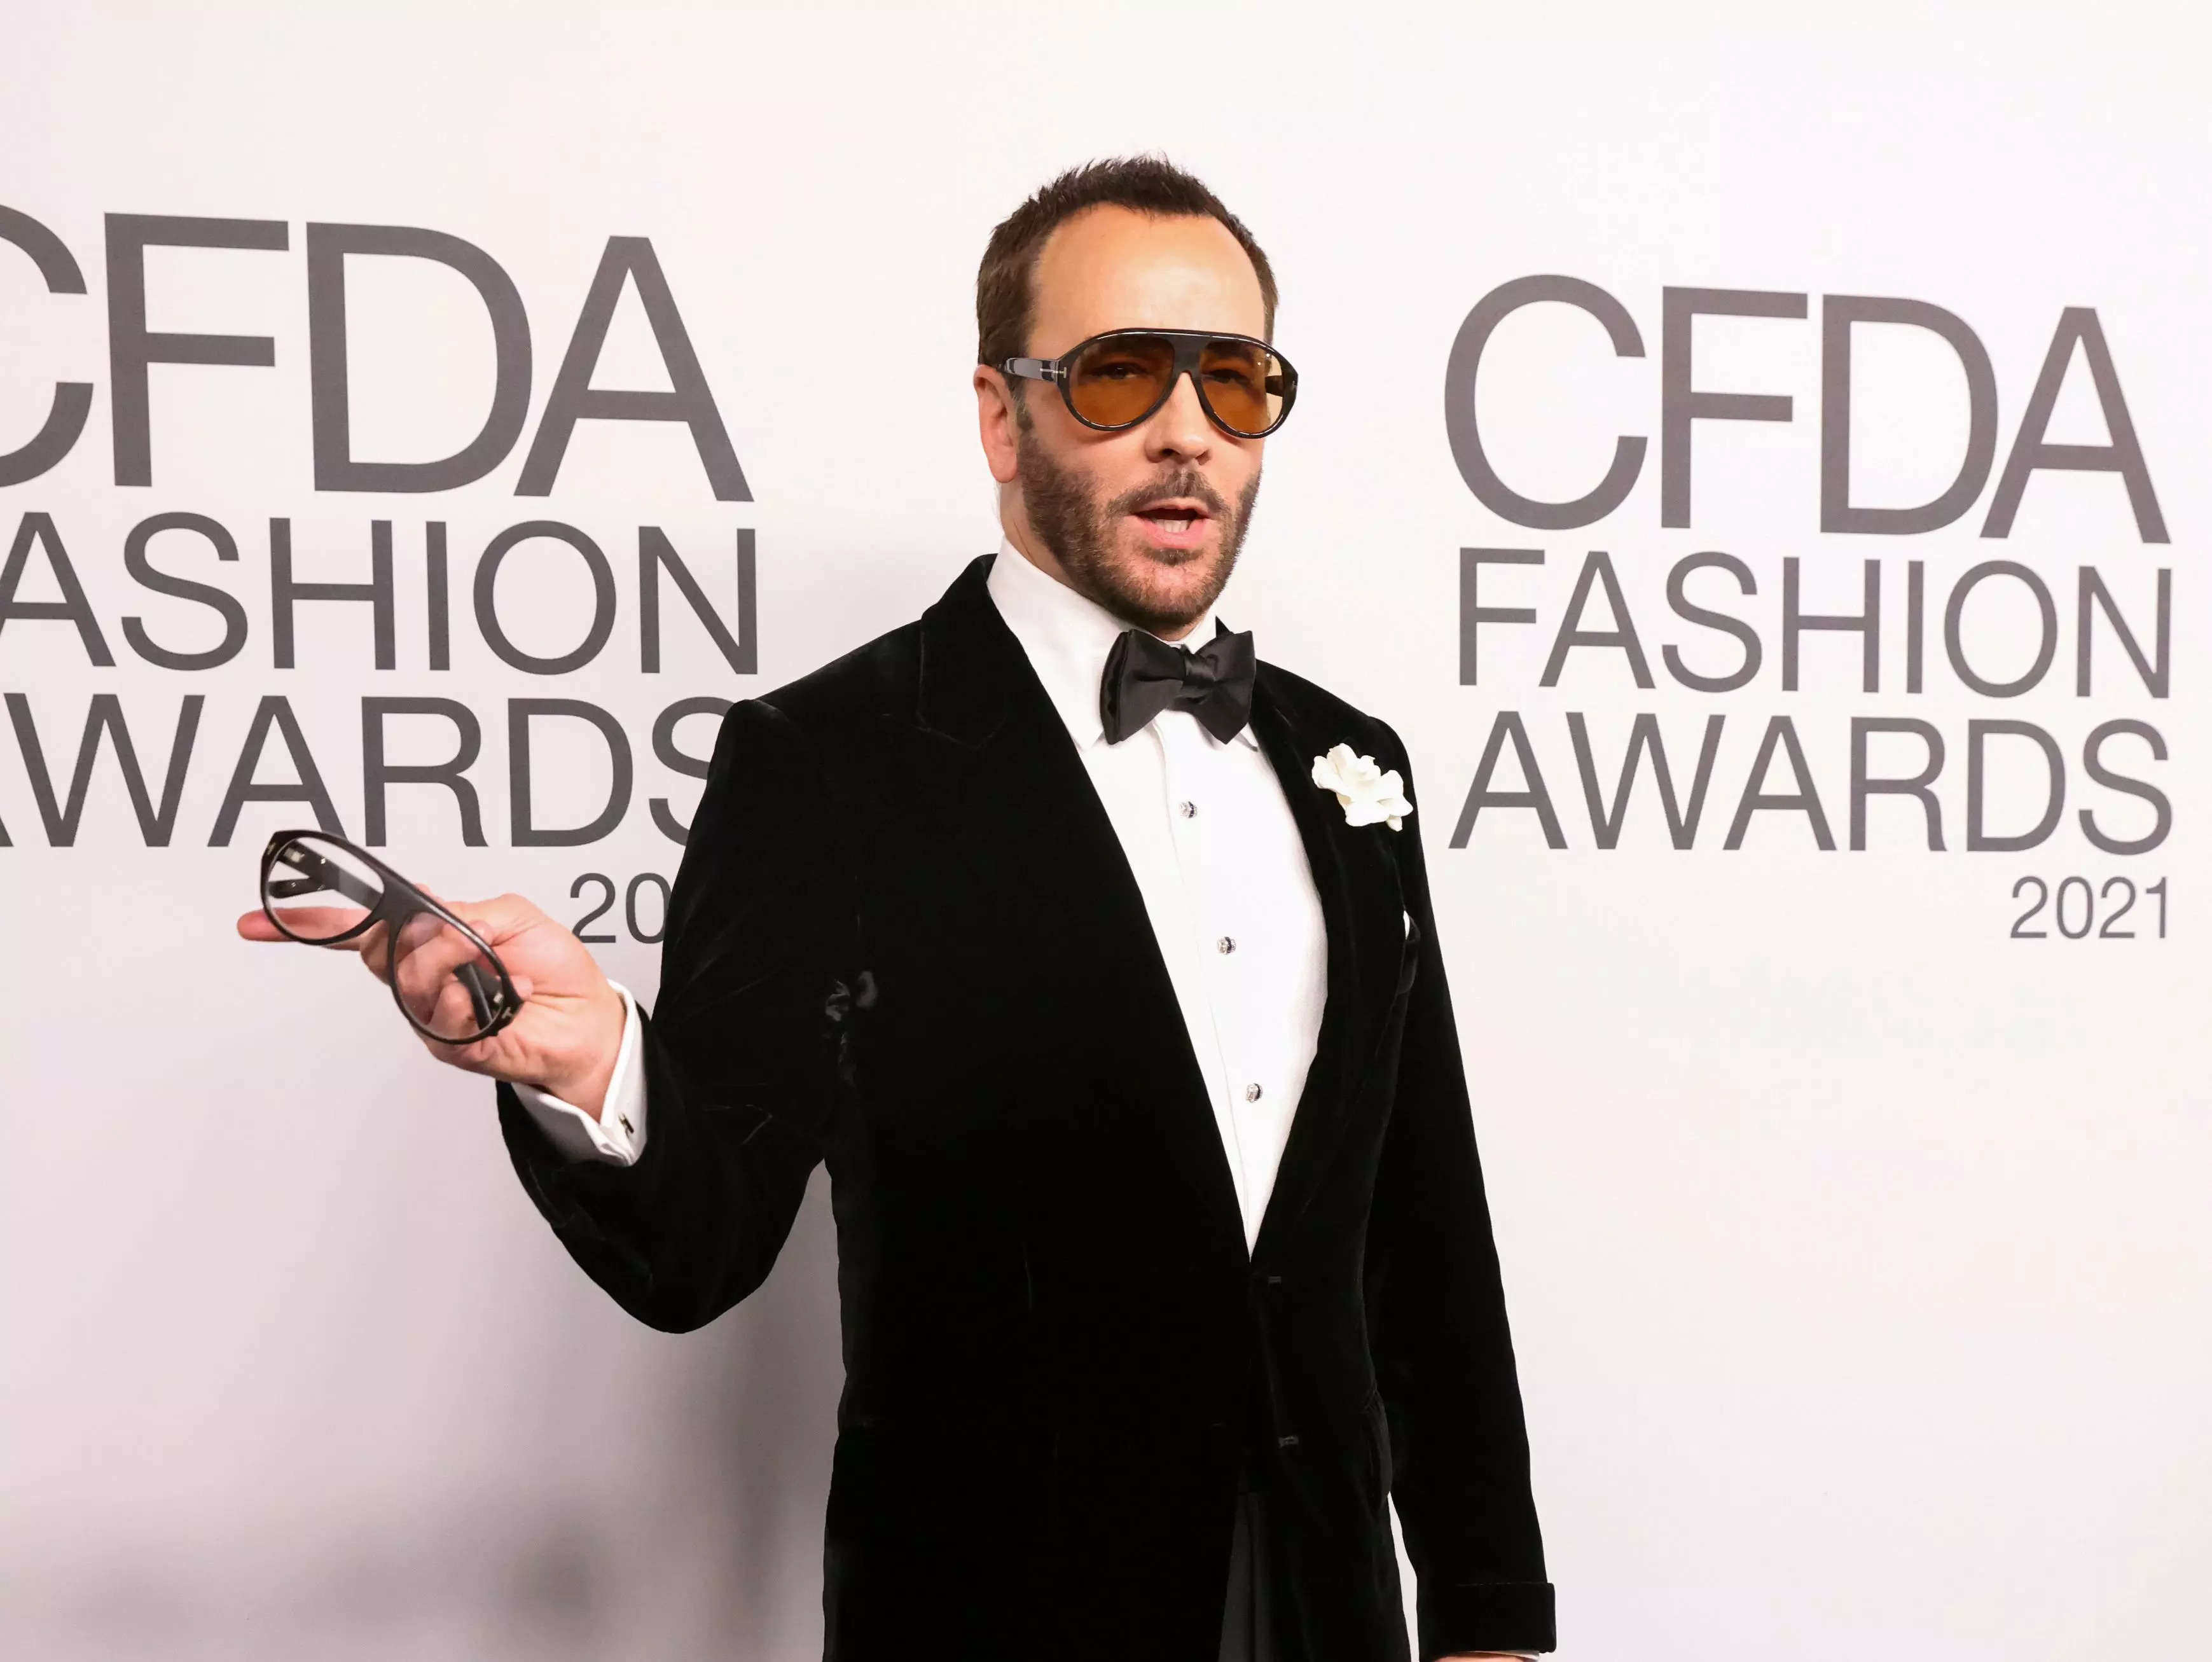 Luxury brand Tom Ford appoints a new CEO among switch up at the top